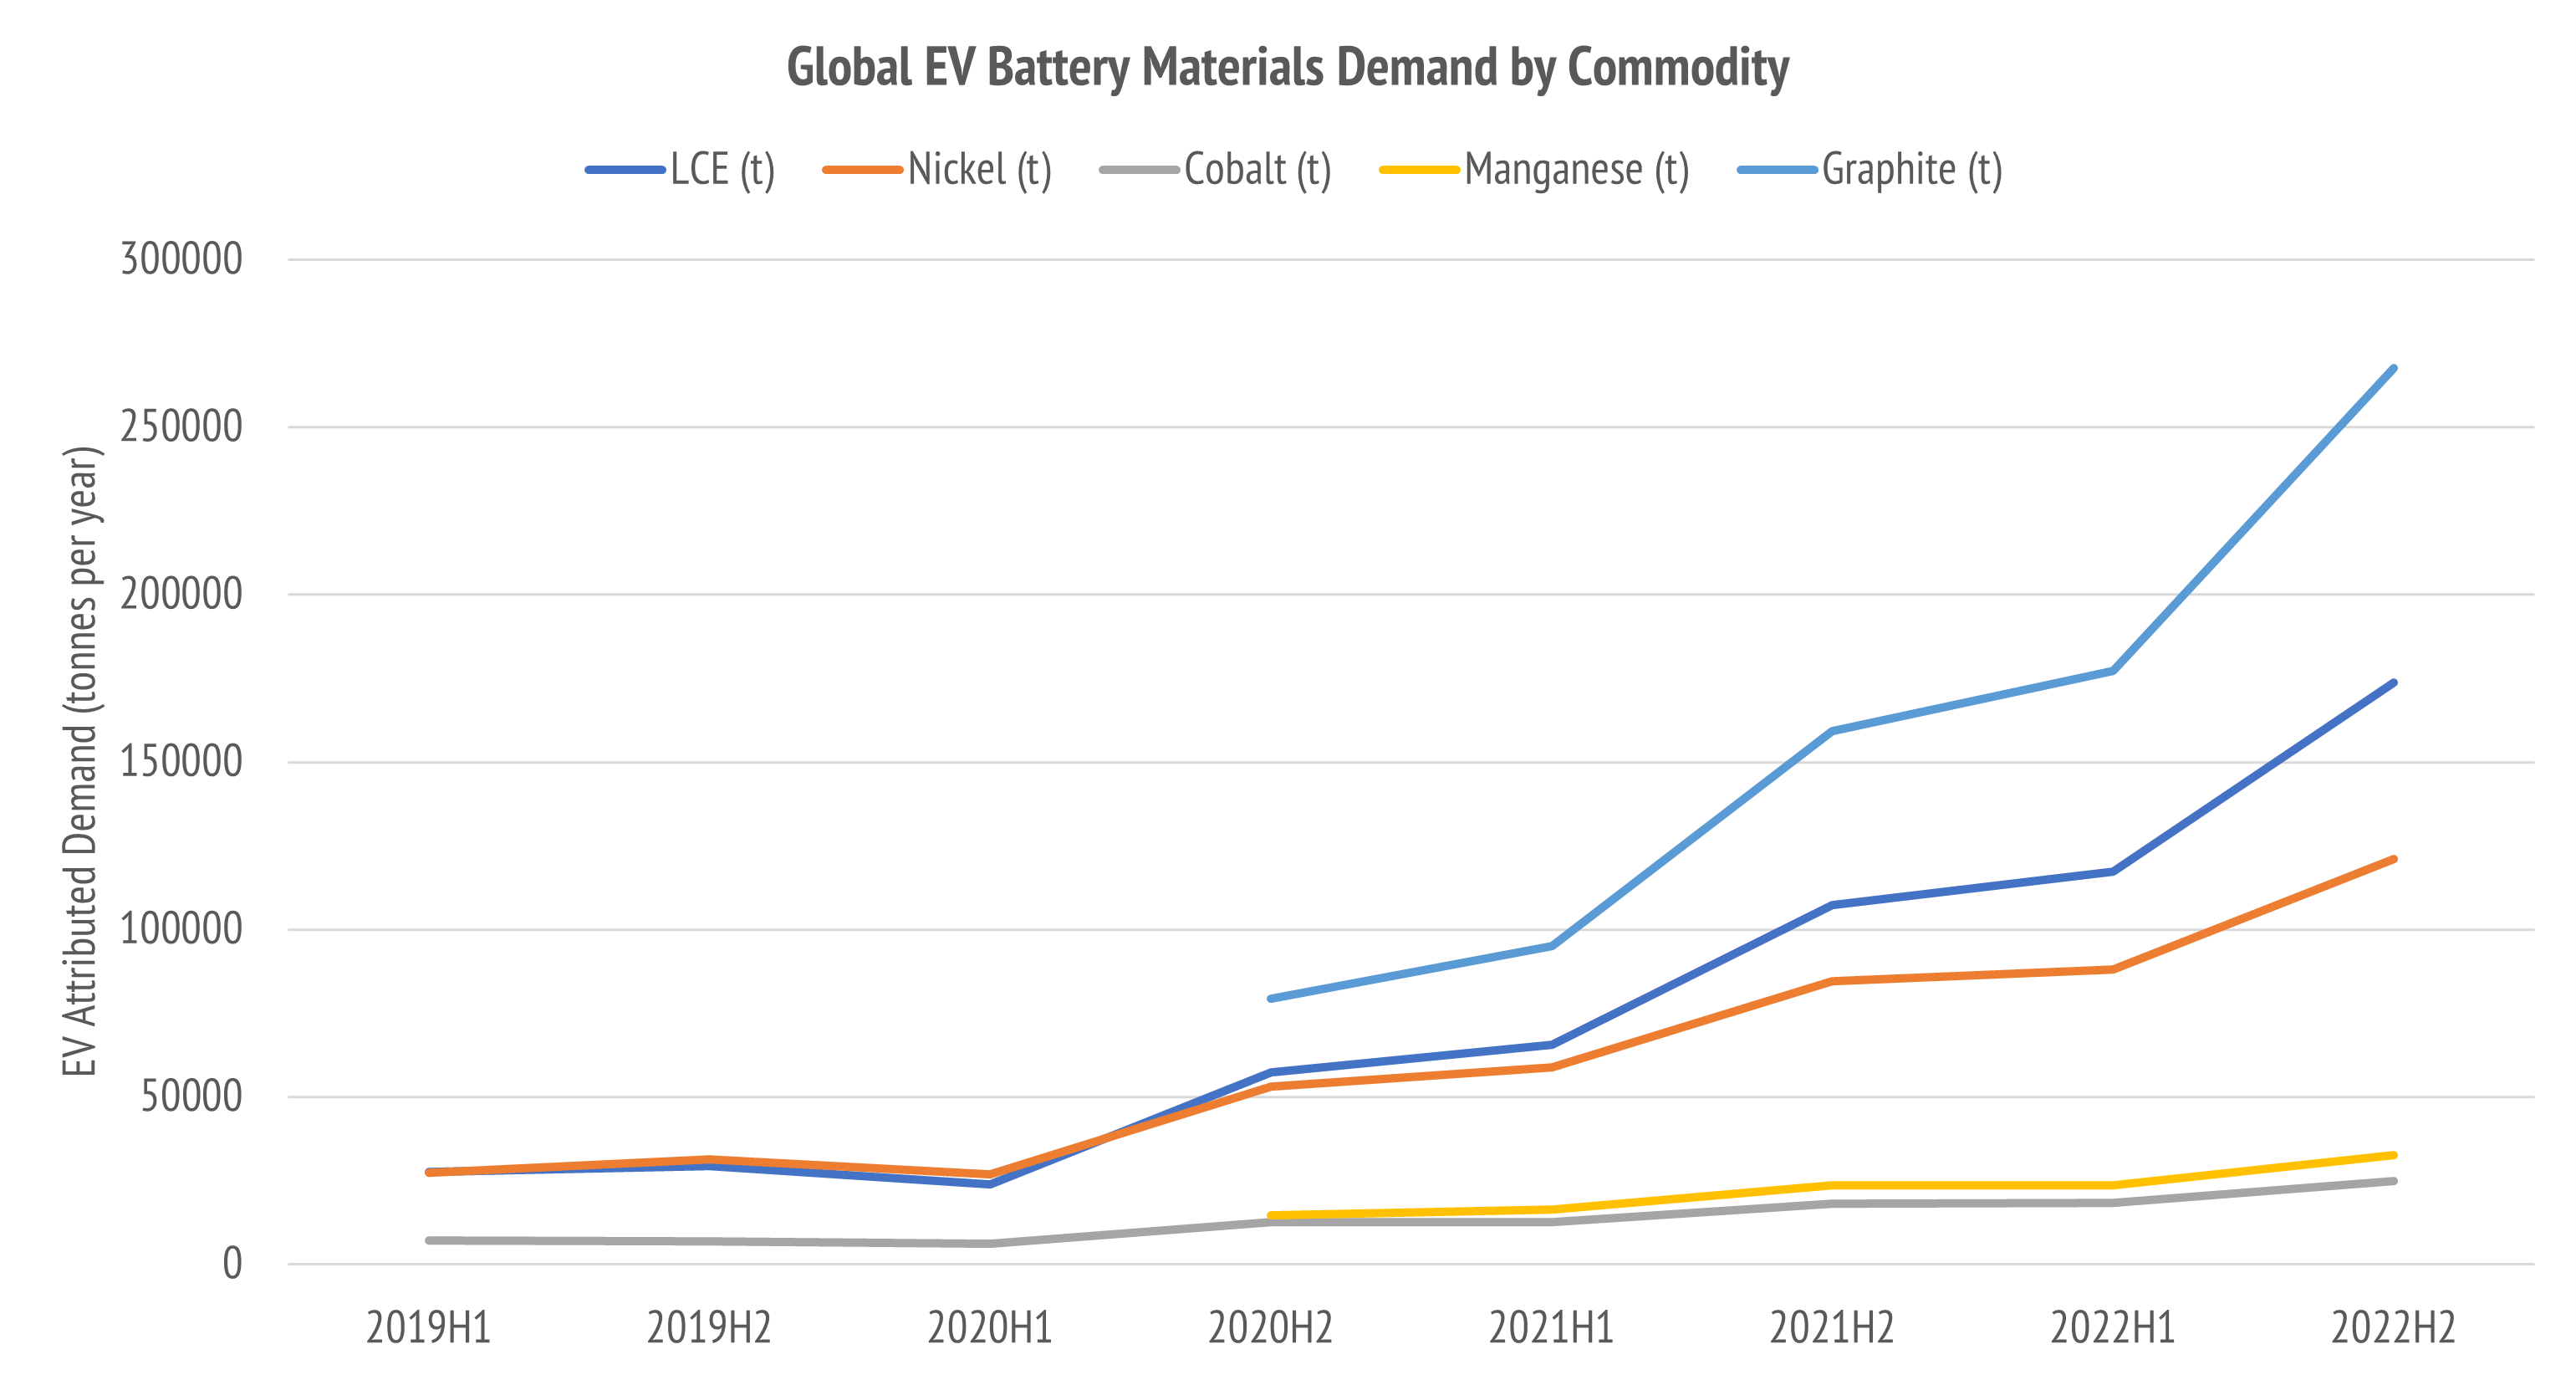 Global EV battery materials demand. Source: Adamas Intelligence State of Charge report (2020-2023).